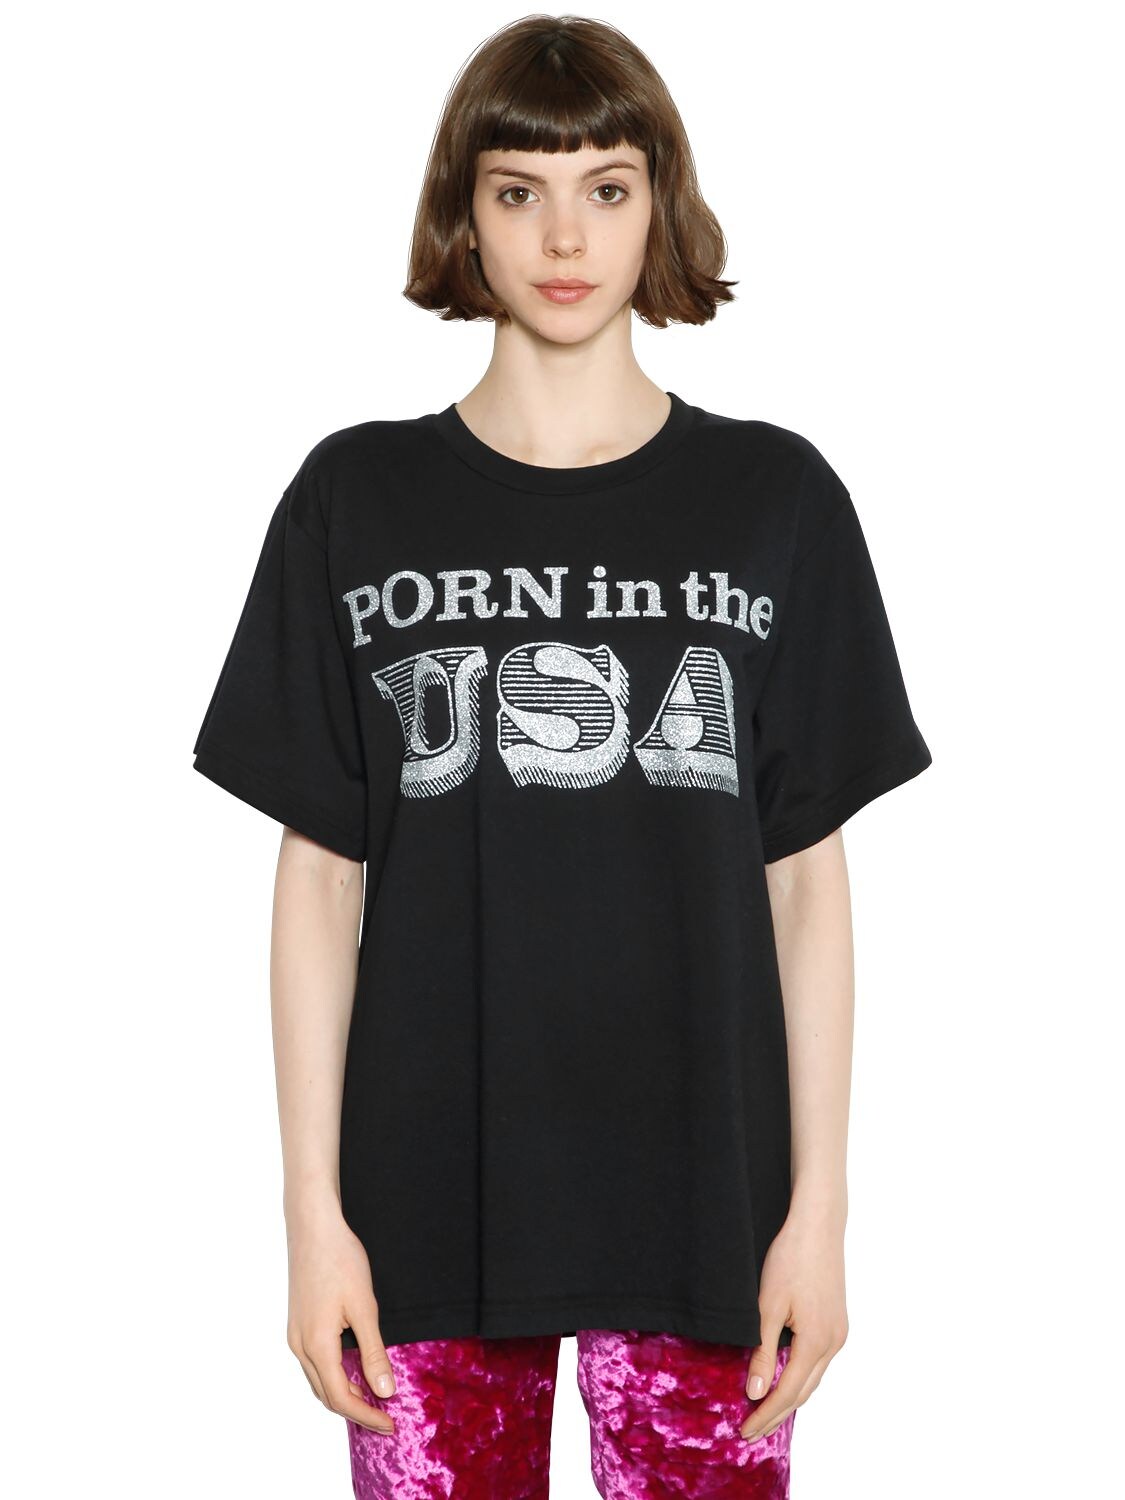 Jeremy Scott Porn In The Usa Cotton Jersey T-shirt In Black